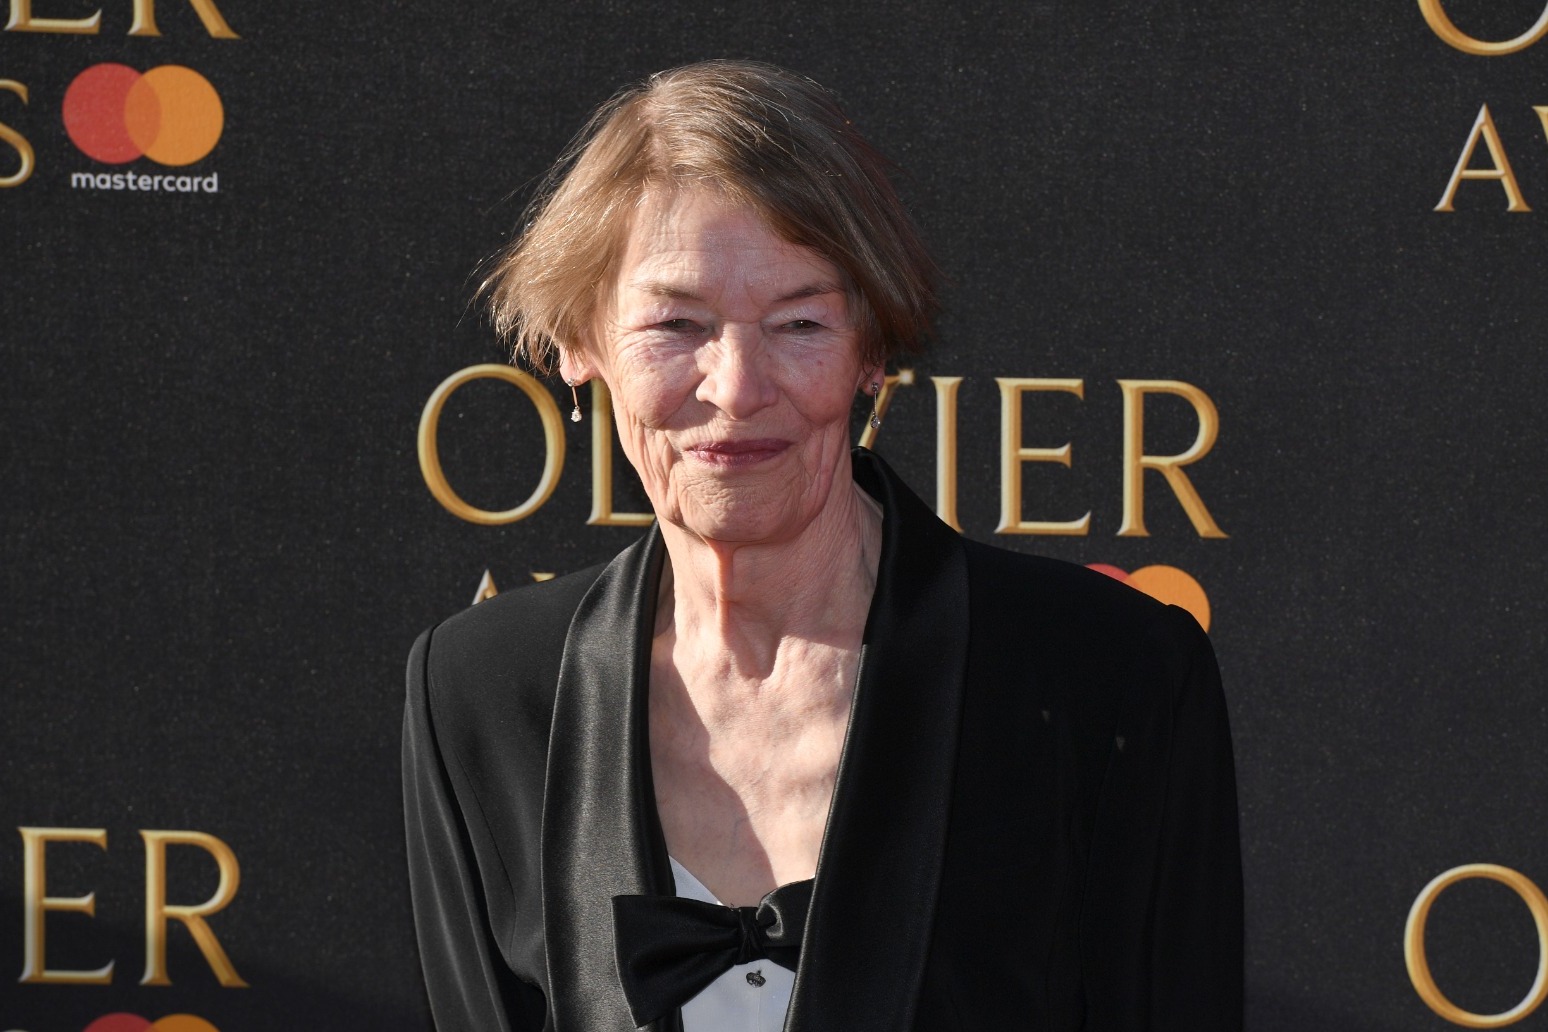 Glenda Jackson says Commons culture is ‘by no means equal yet’ 